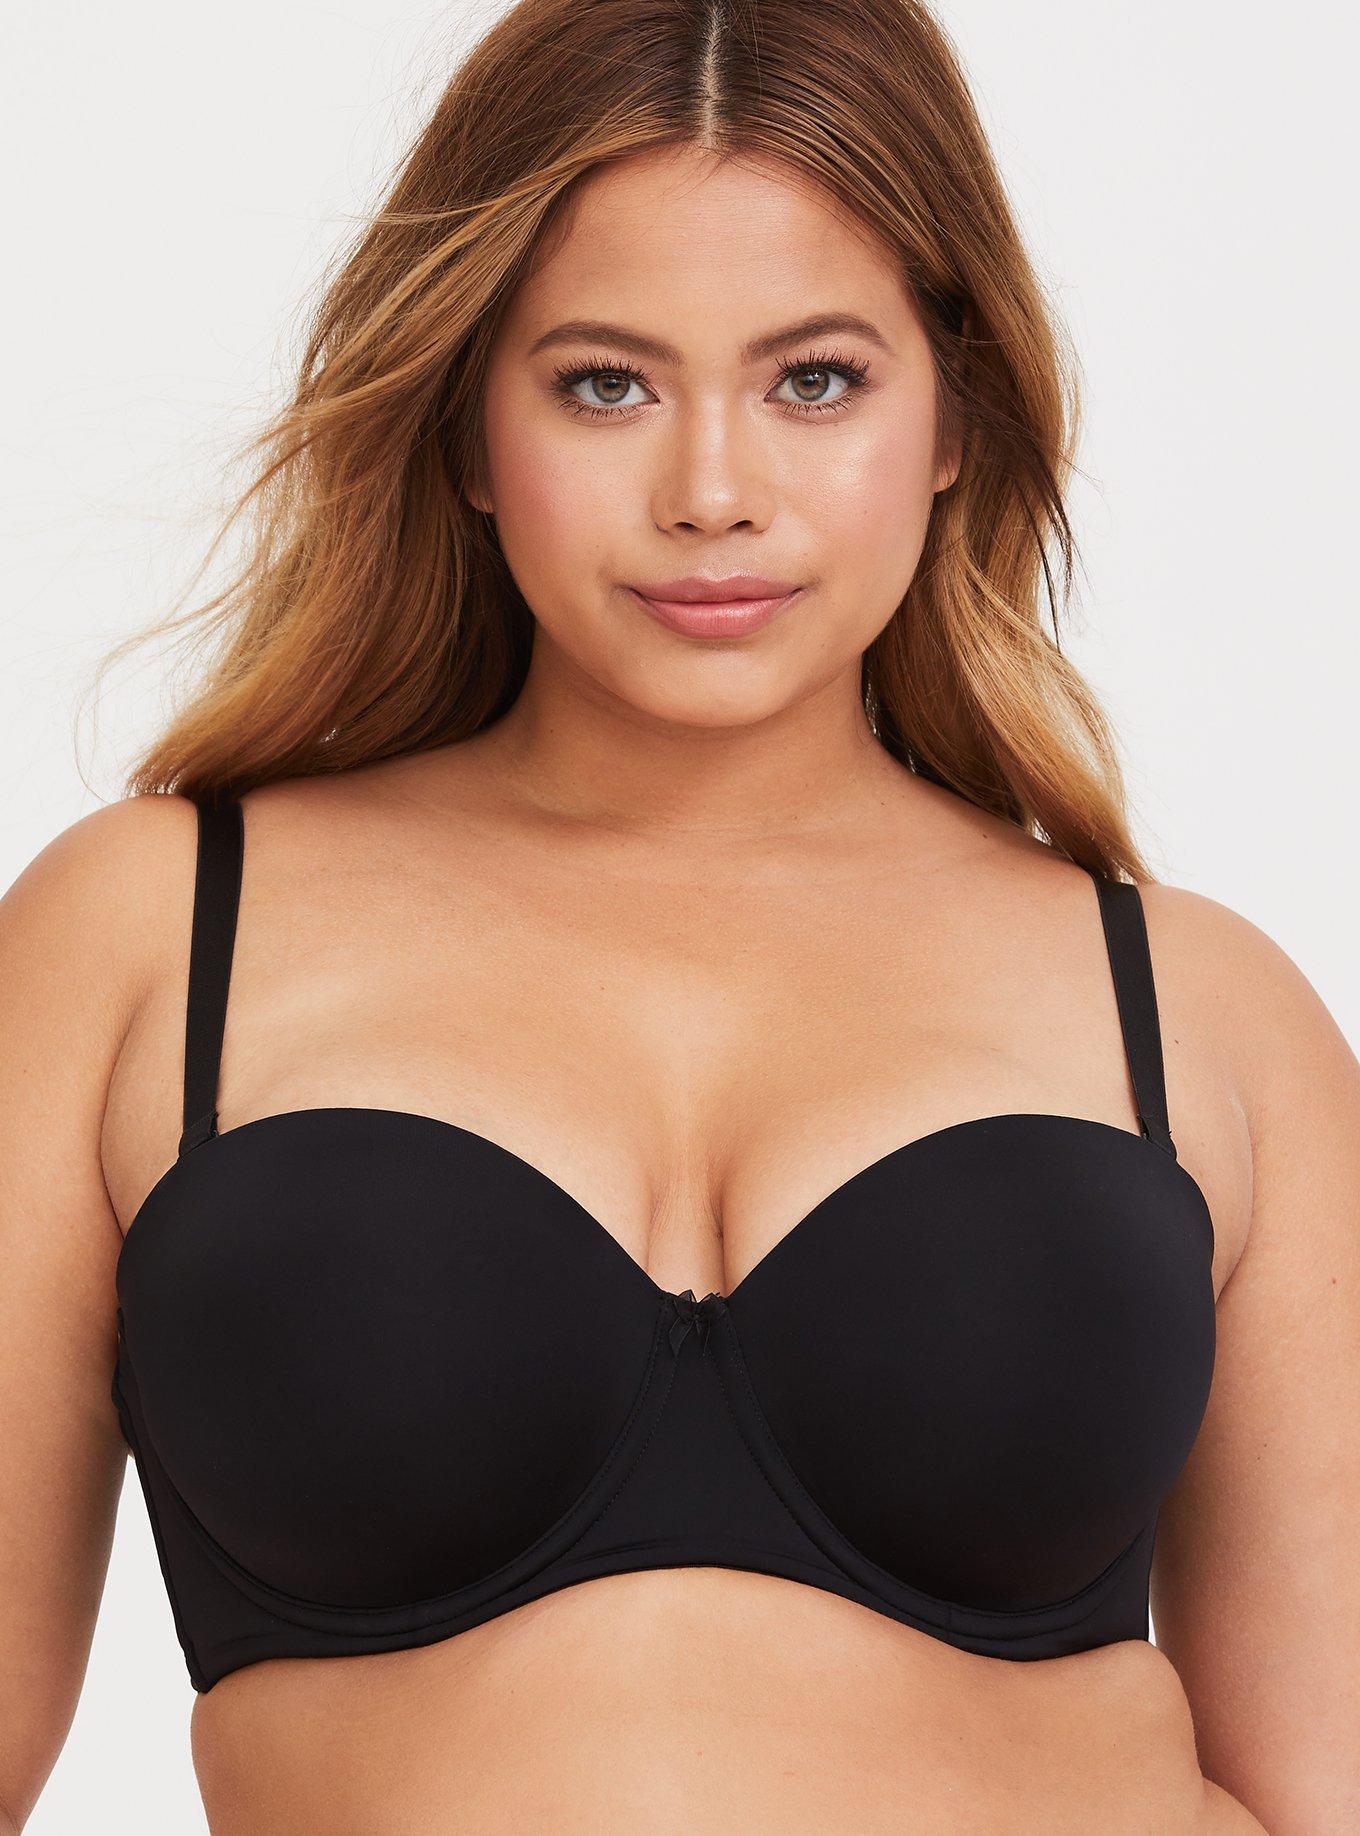 Push-up bra sales sag as big breasts fall out of fashion